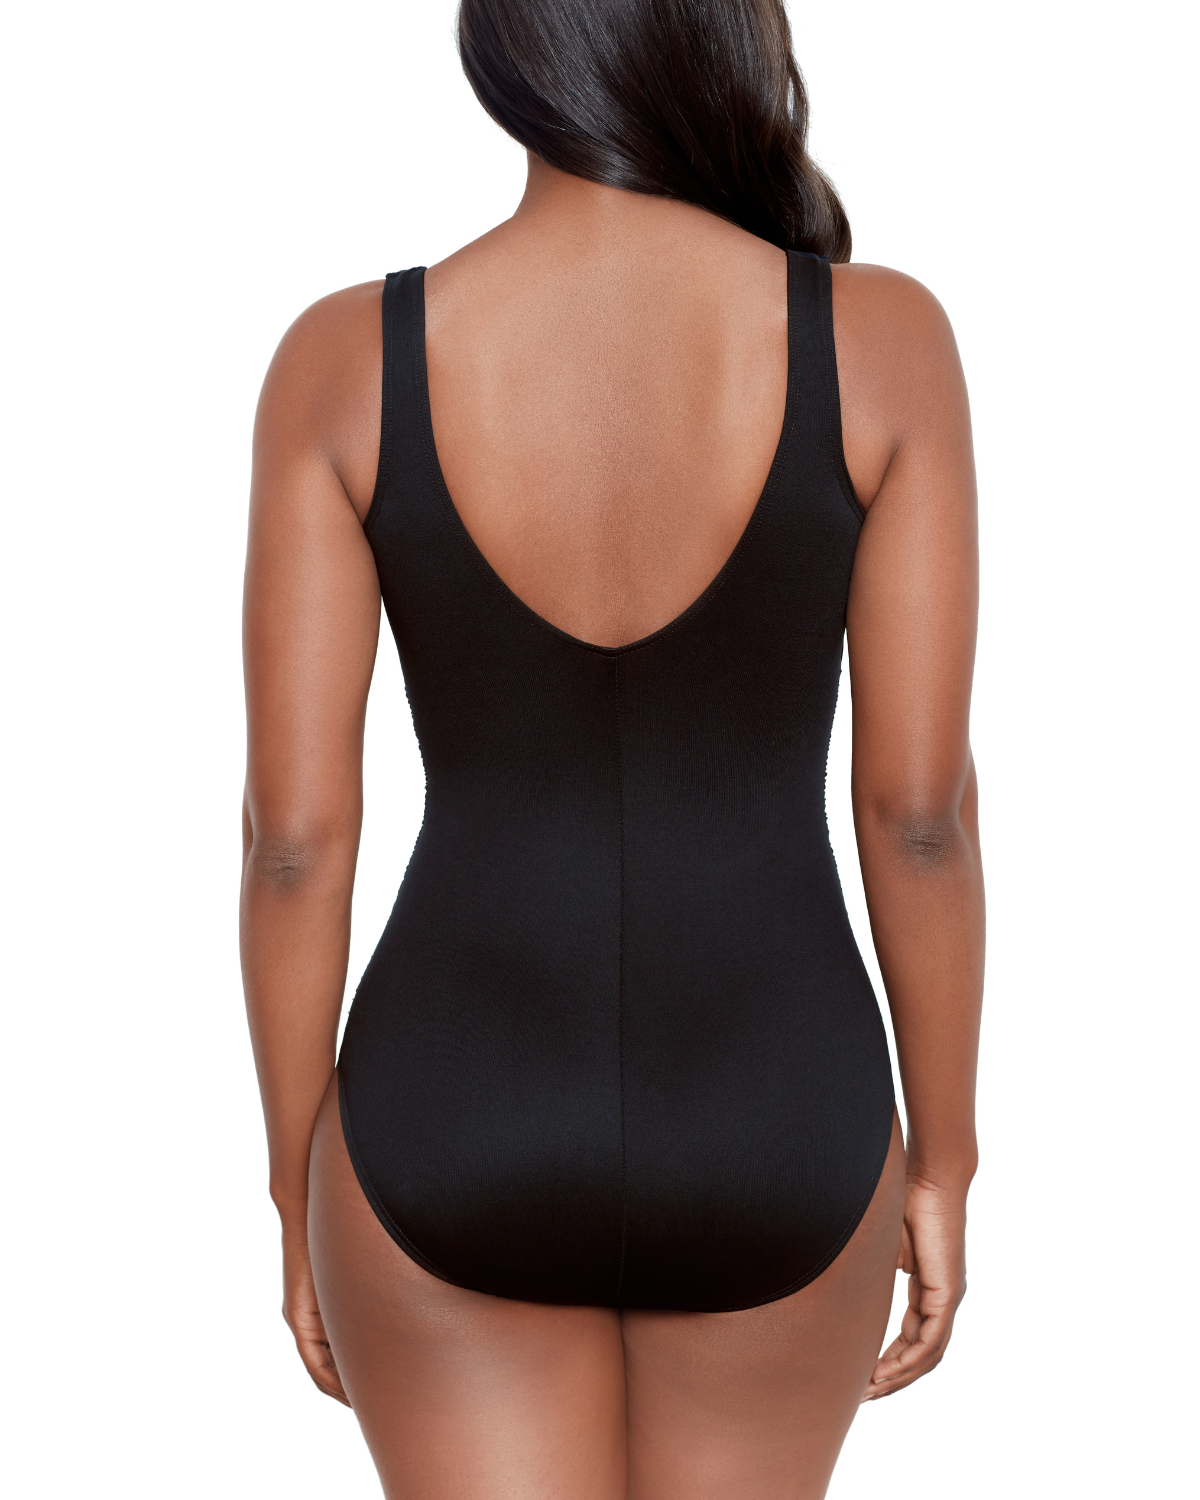 Model wearing a one piece with hidden v wire and shirred torso in black